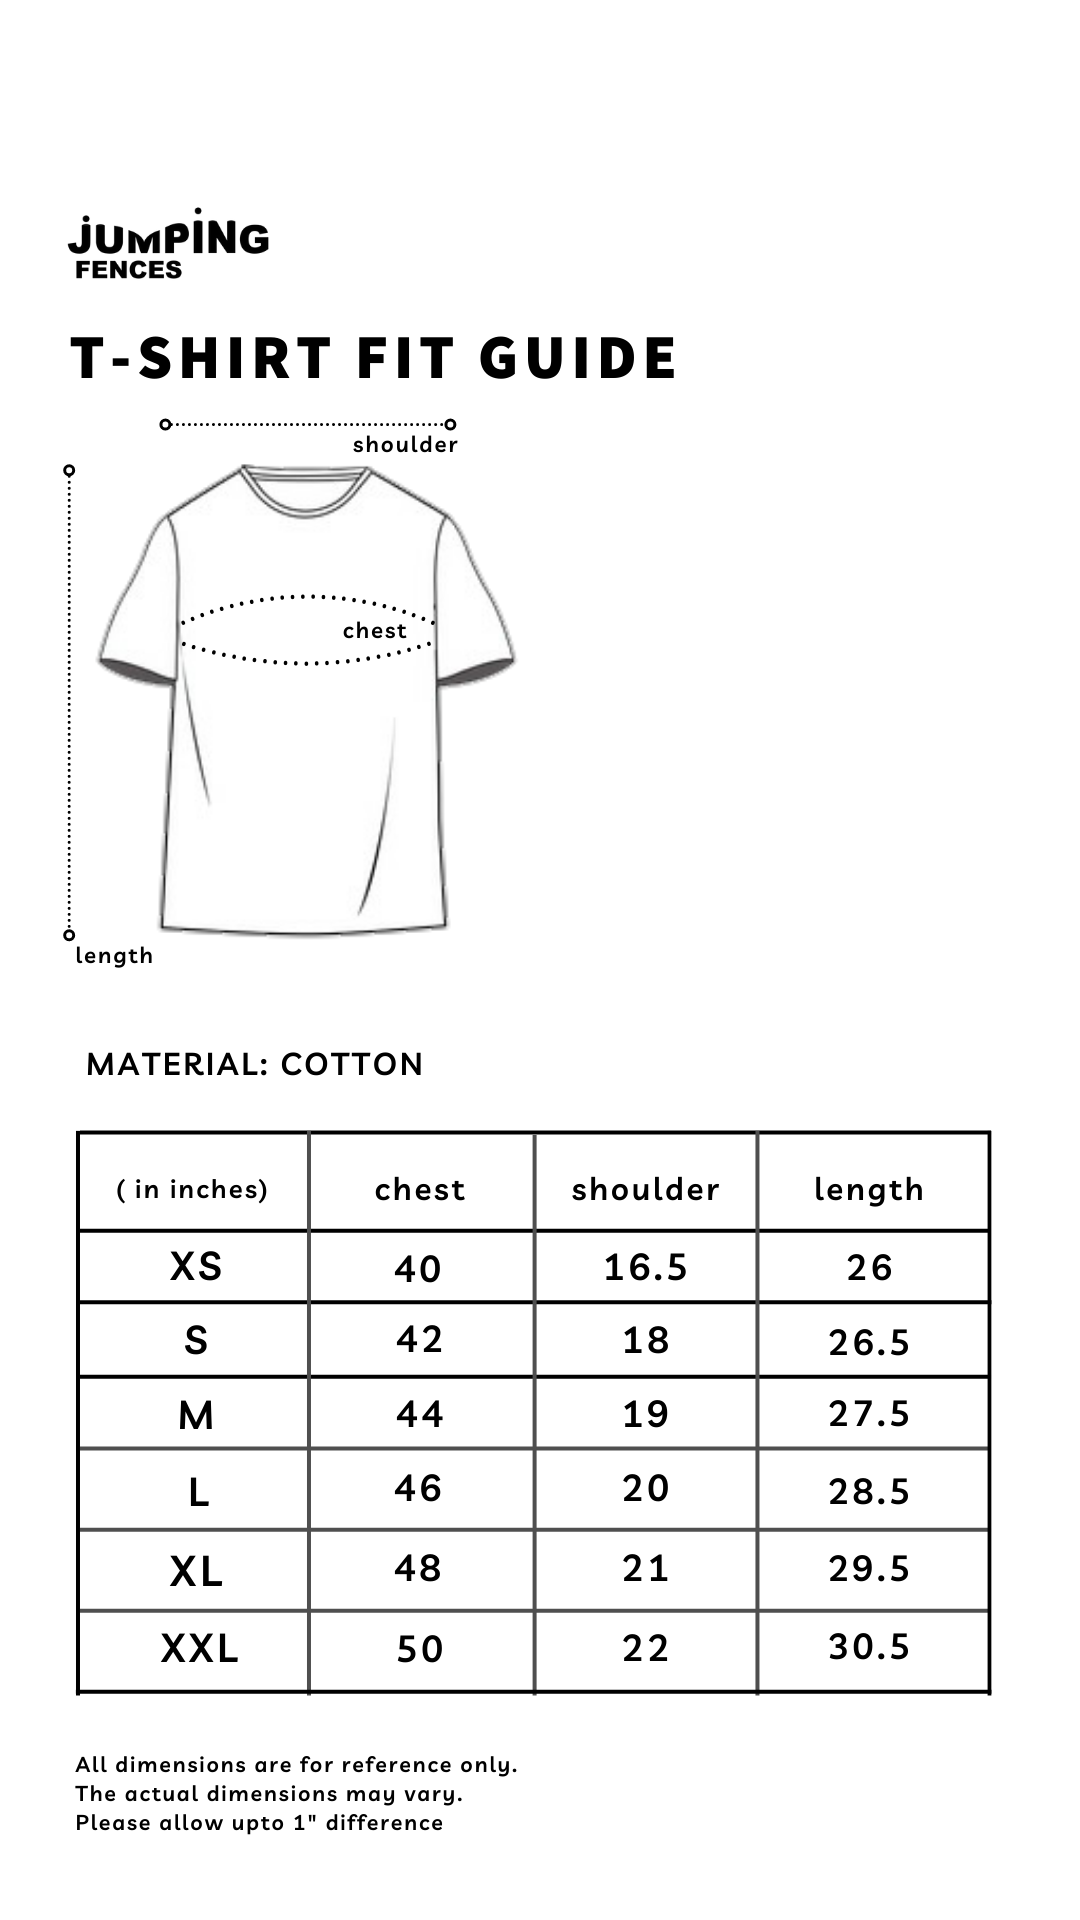 Jumping Fences T-shirt size guide